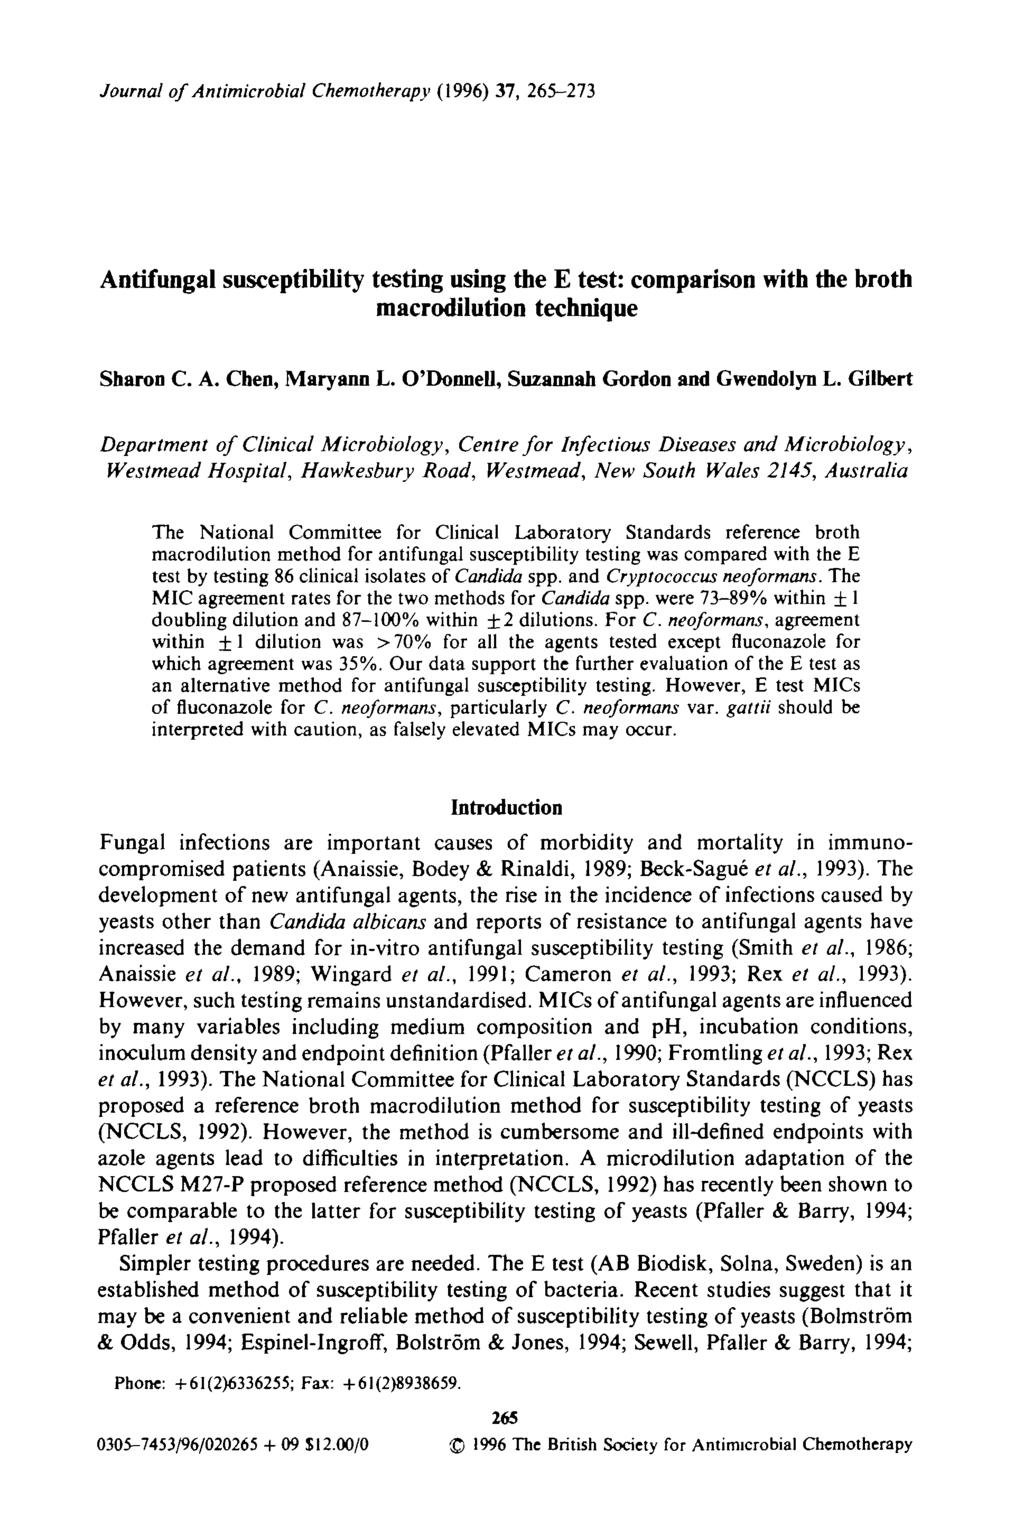 Journal of Antimicrobial Chemotherapy (996) 7, 65-7 Antifungal susceptibility testing using the E test: comparison with the broth macrodilution technique Sharon C. A. Chen, Maryann L.